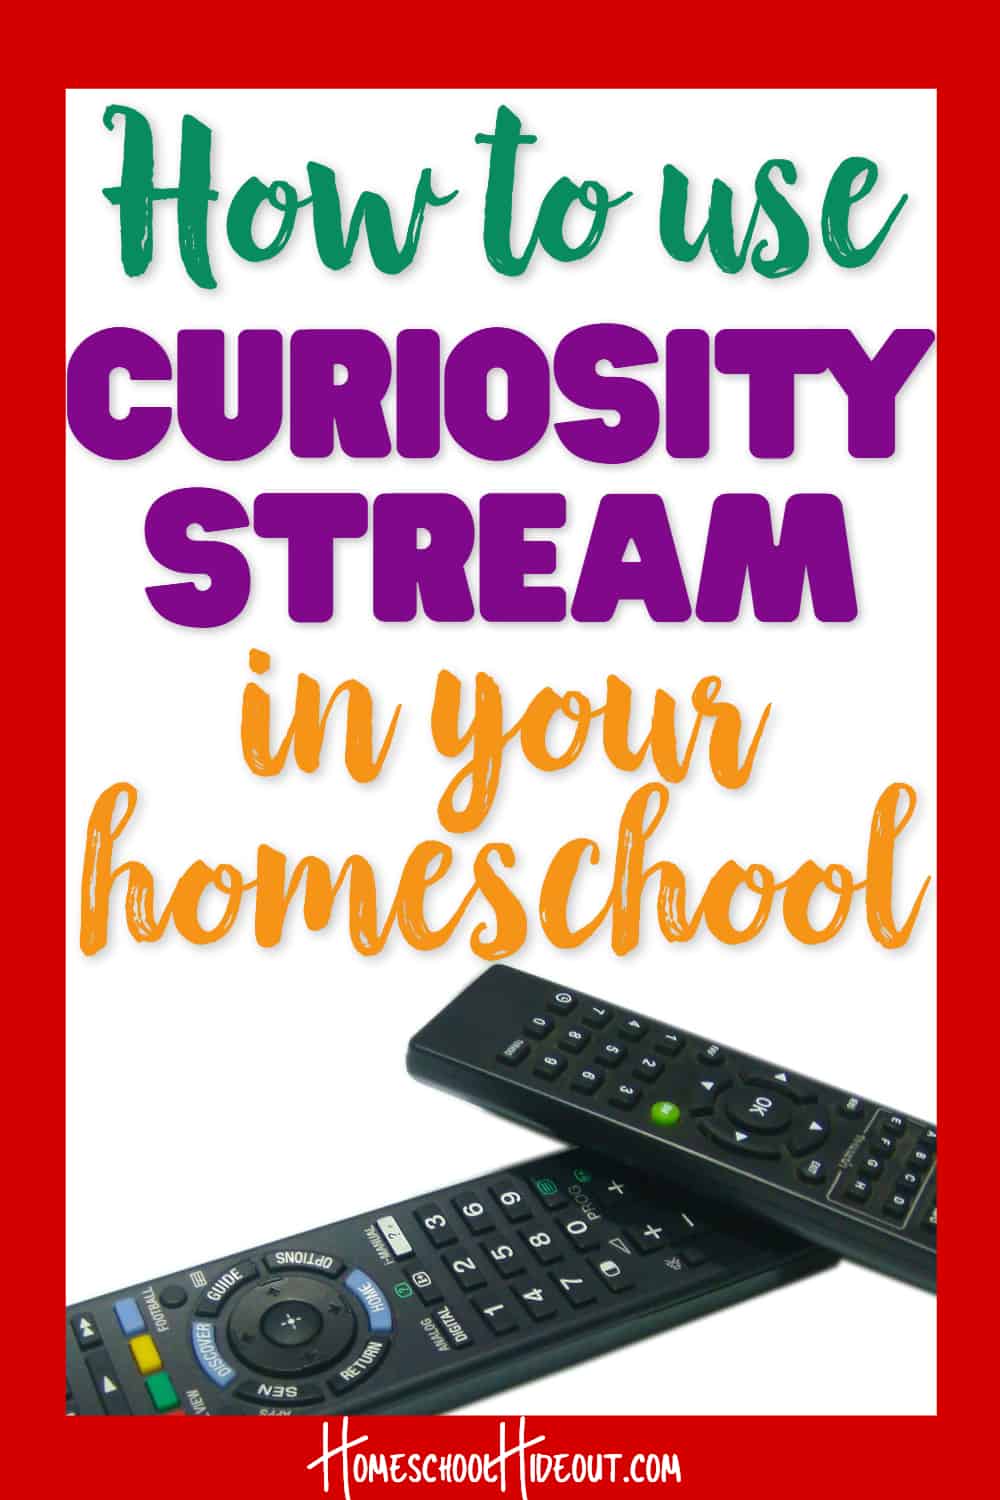 I just learned that if I homeschool with CuriosityStream, the kids will love me even more! #homeschool #documentaries #techteaching